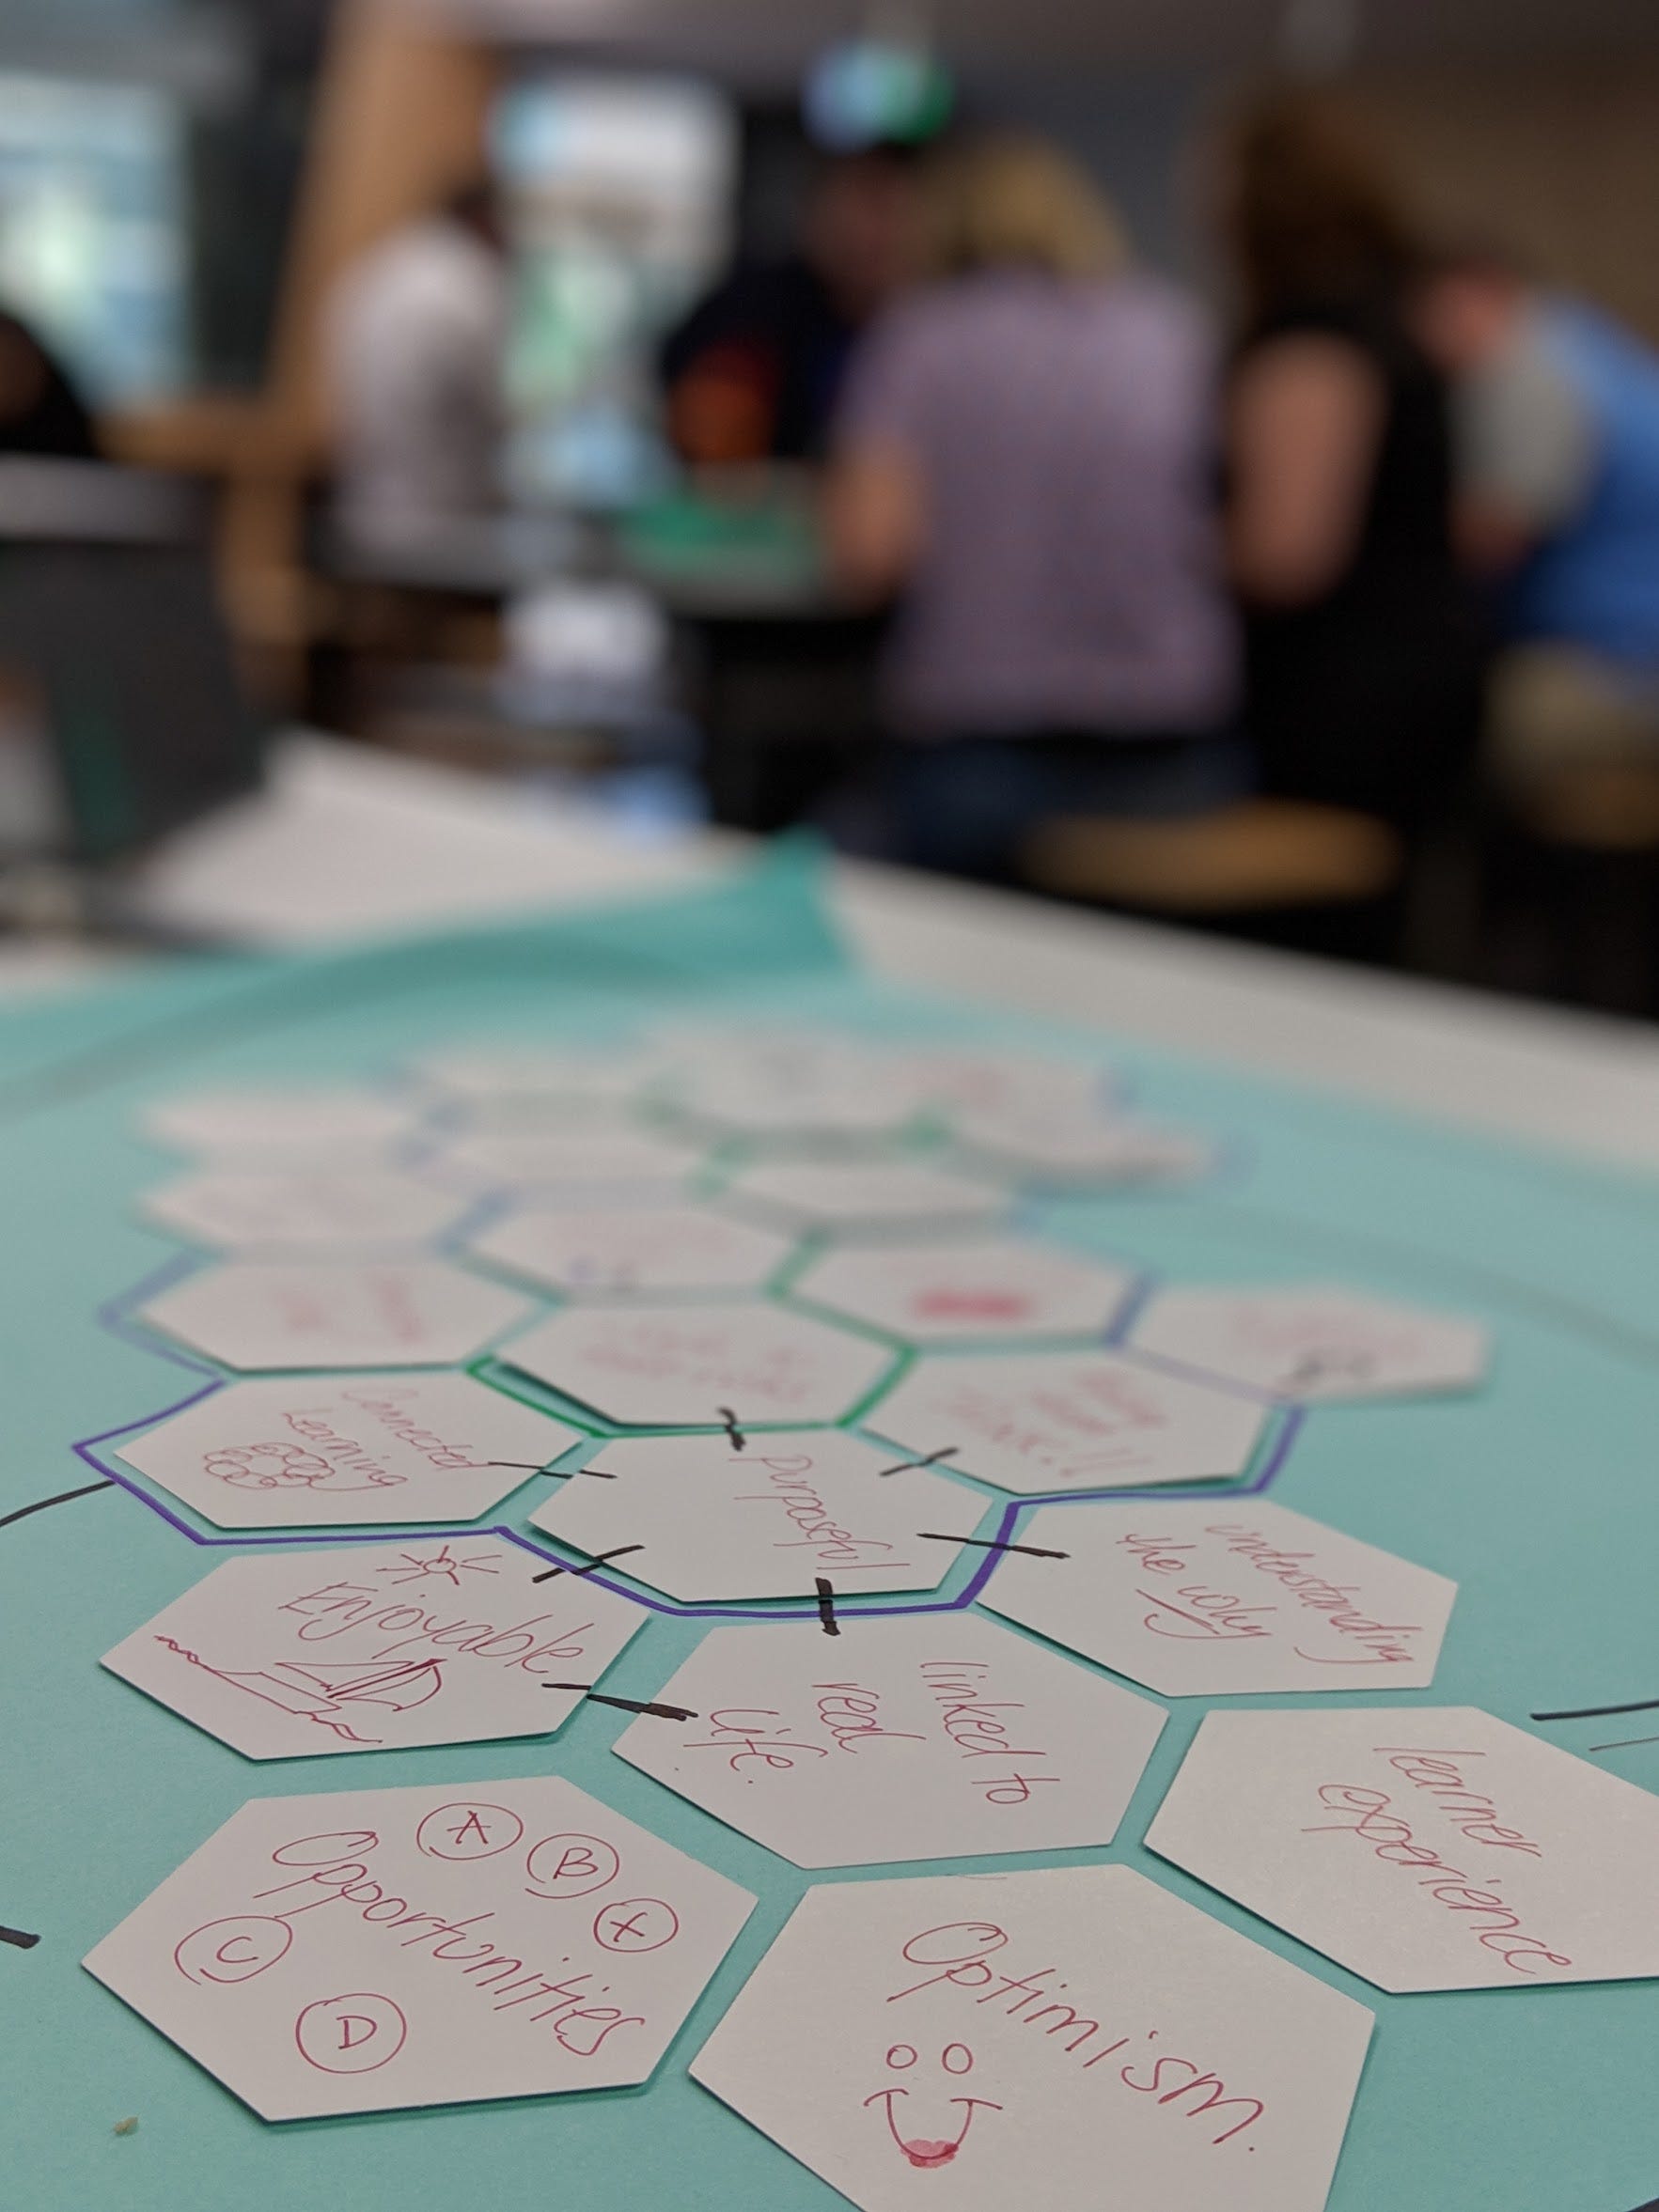 Close up of hexagons from a thinking exercise about what is important in learning.